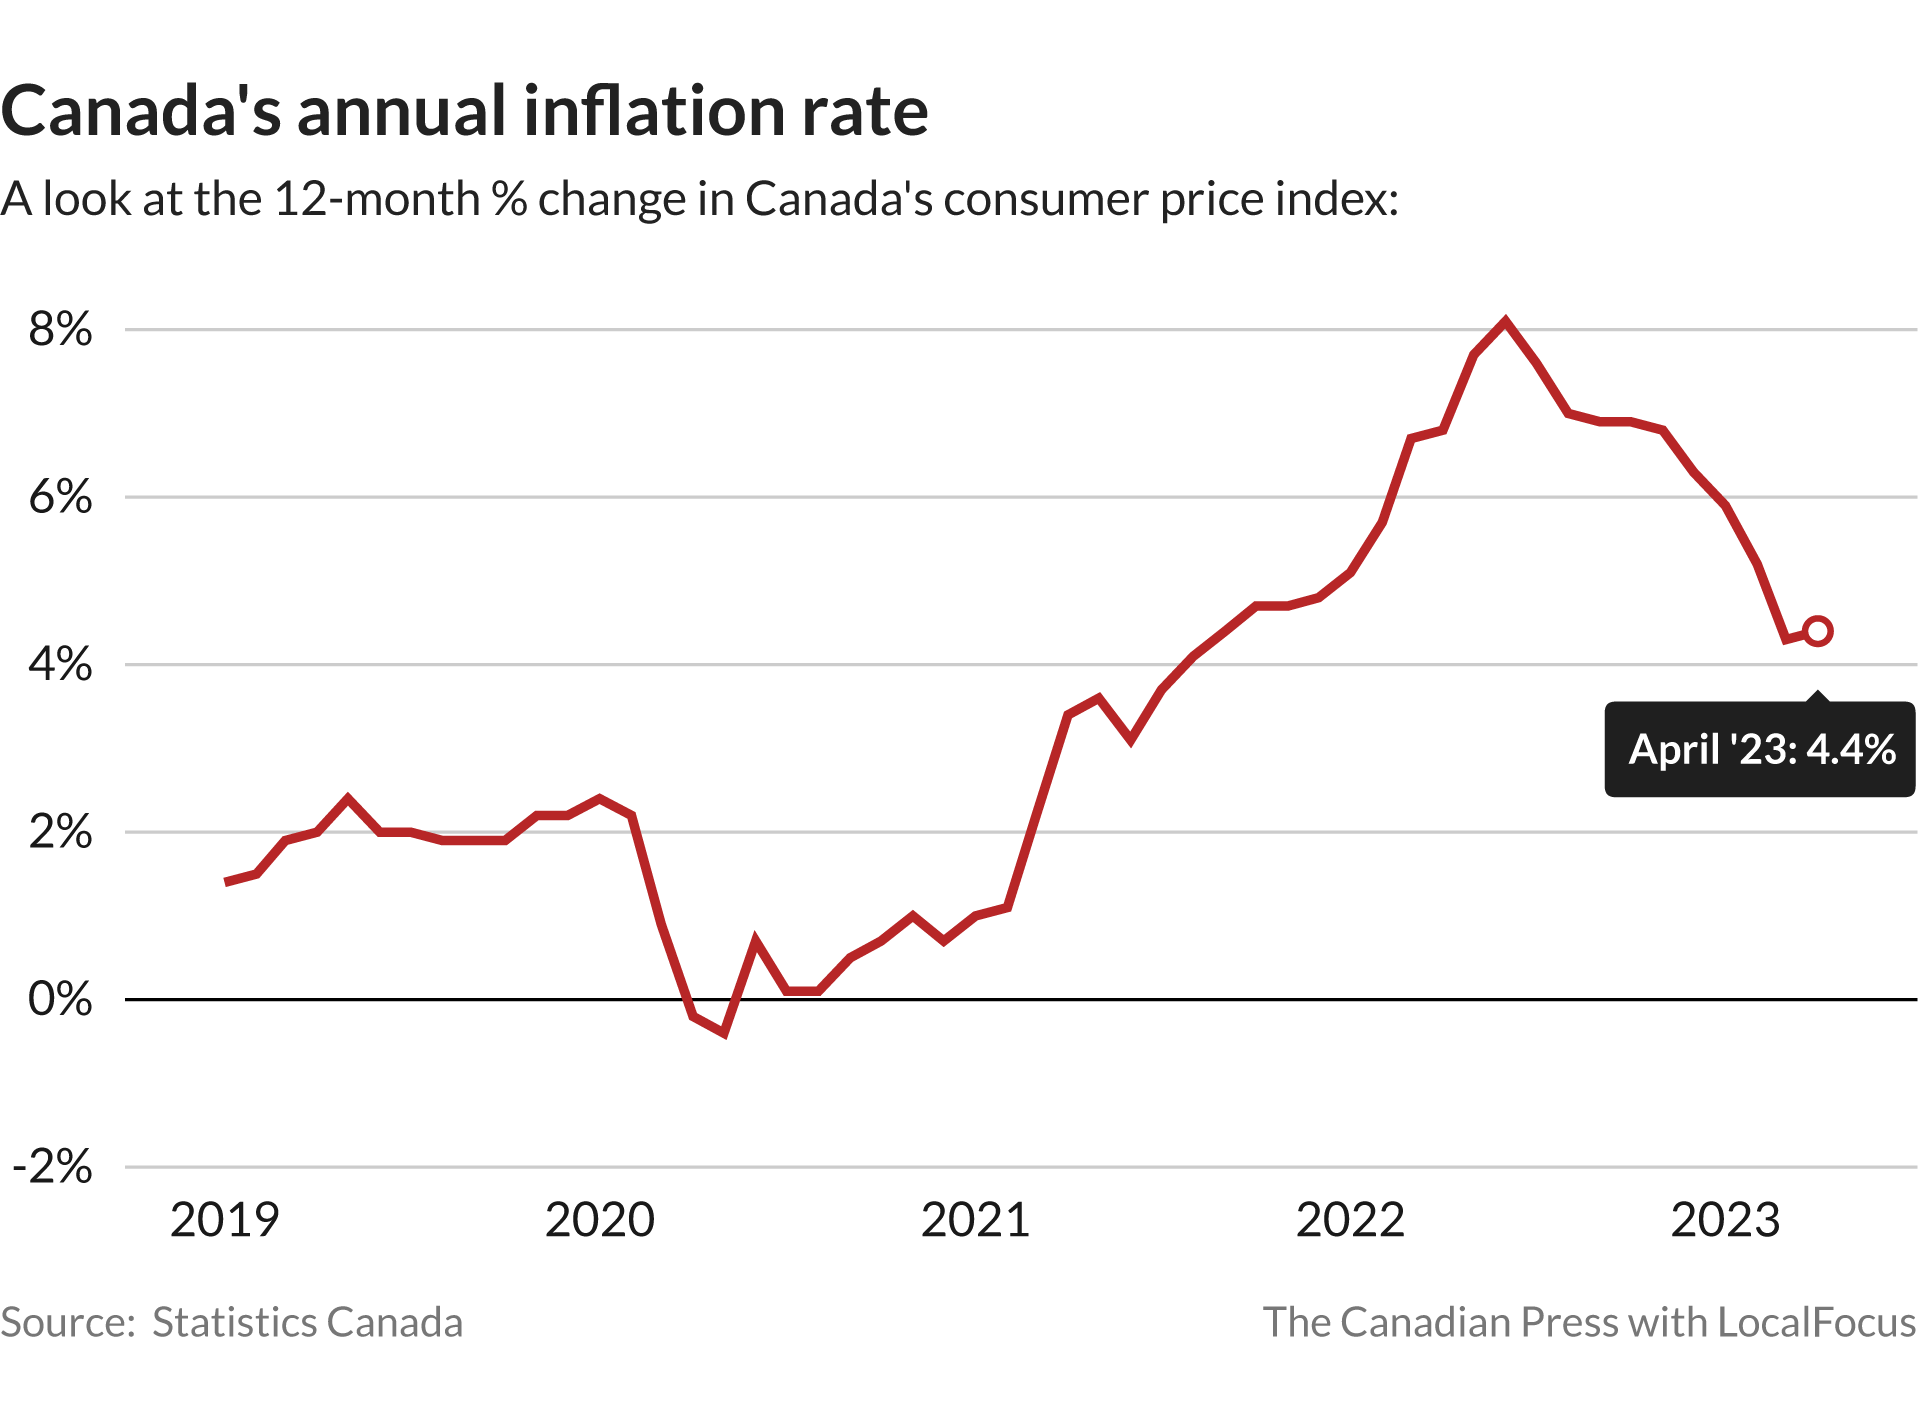 Annual inflation rate edged up in April, raises chances of higher